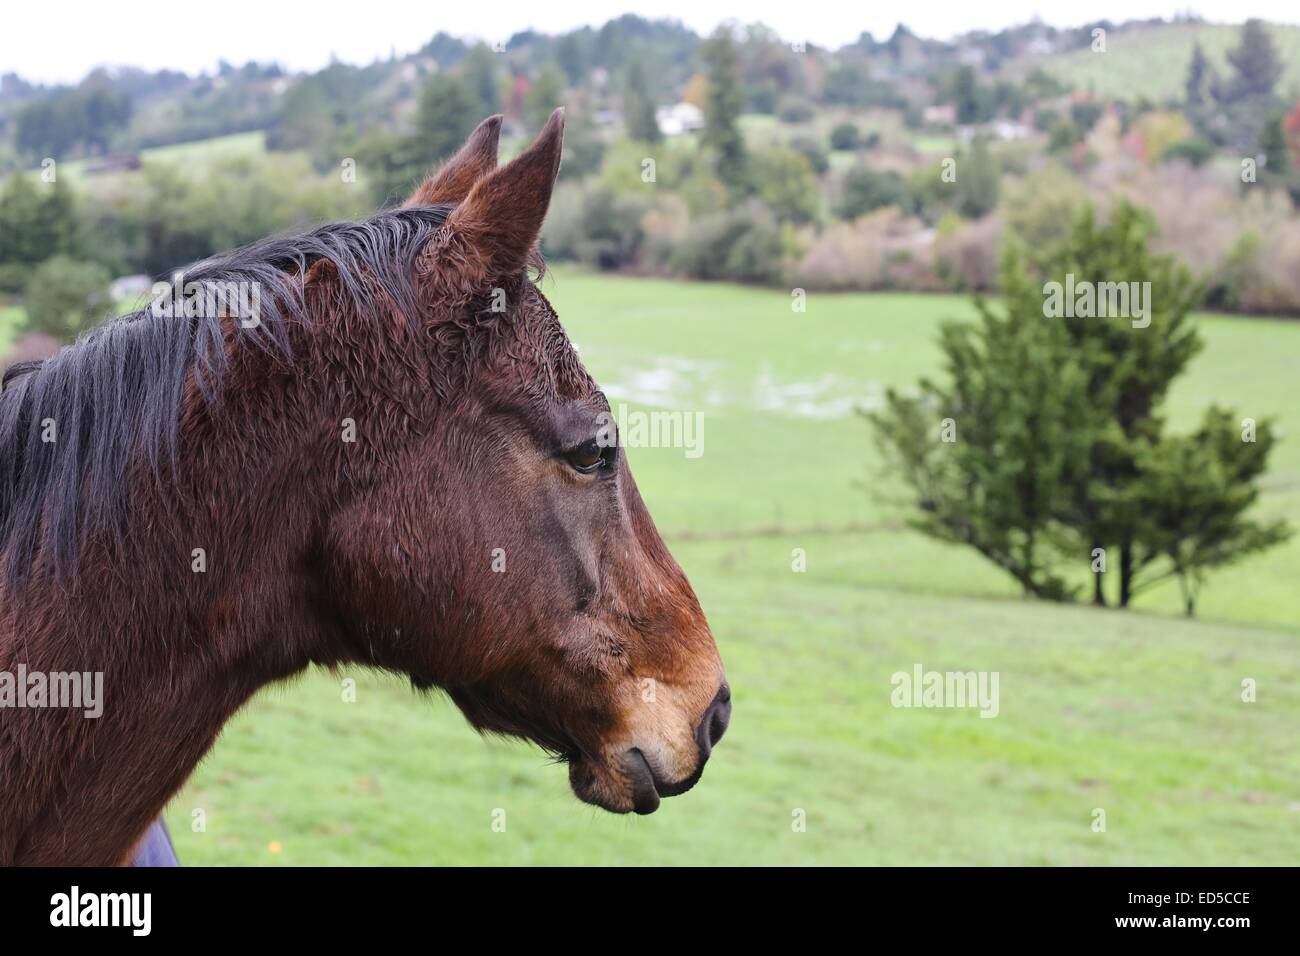 A wet horse in a field with green rolling hills in the background. Stock Photo